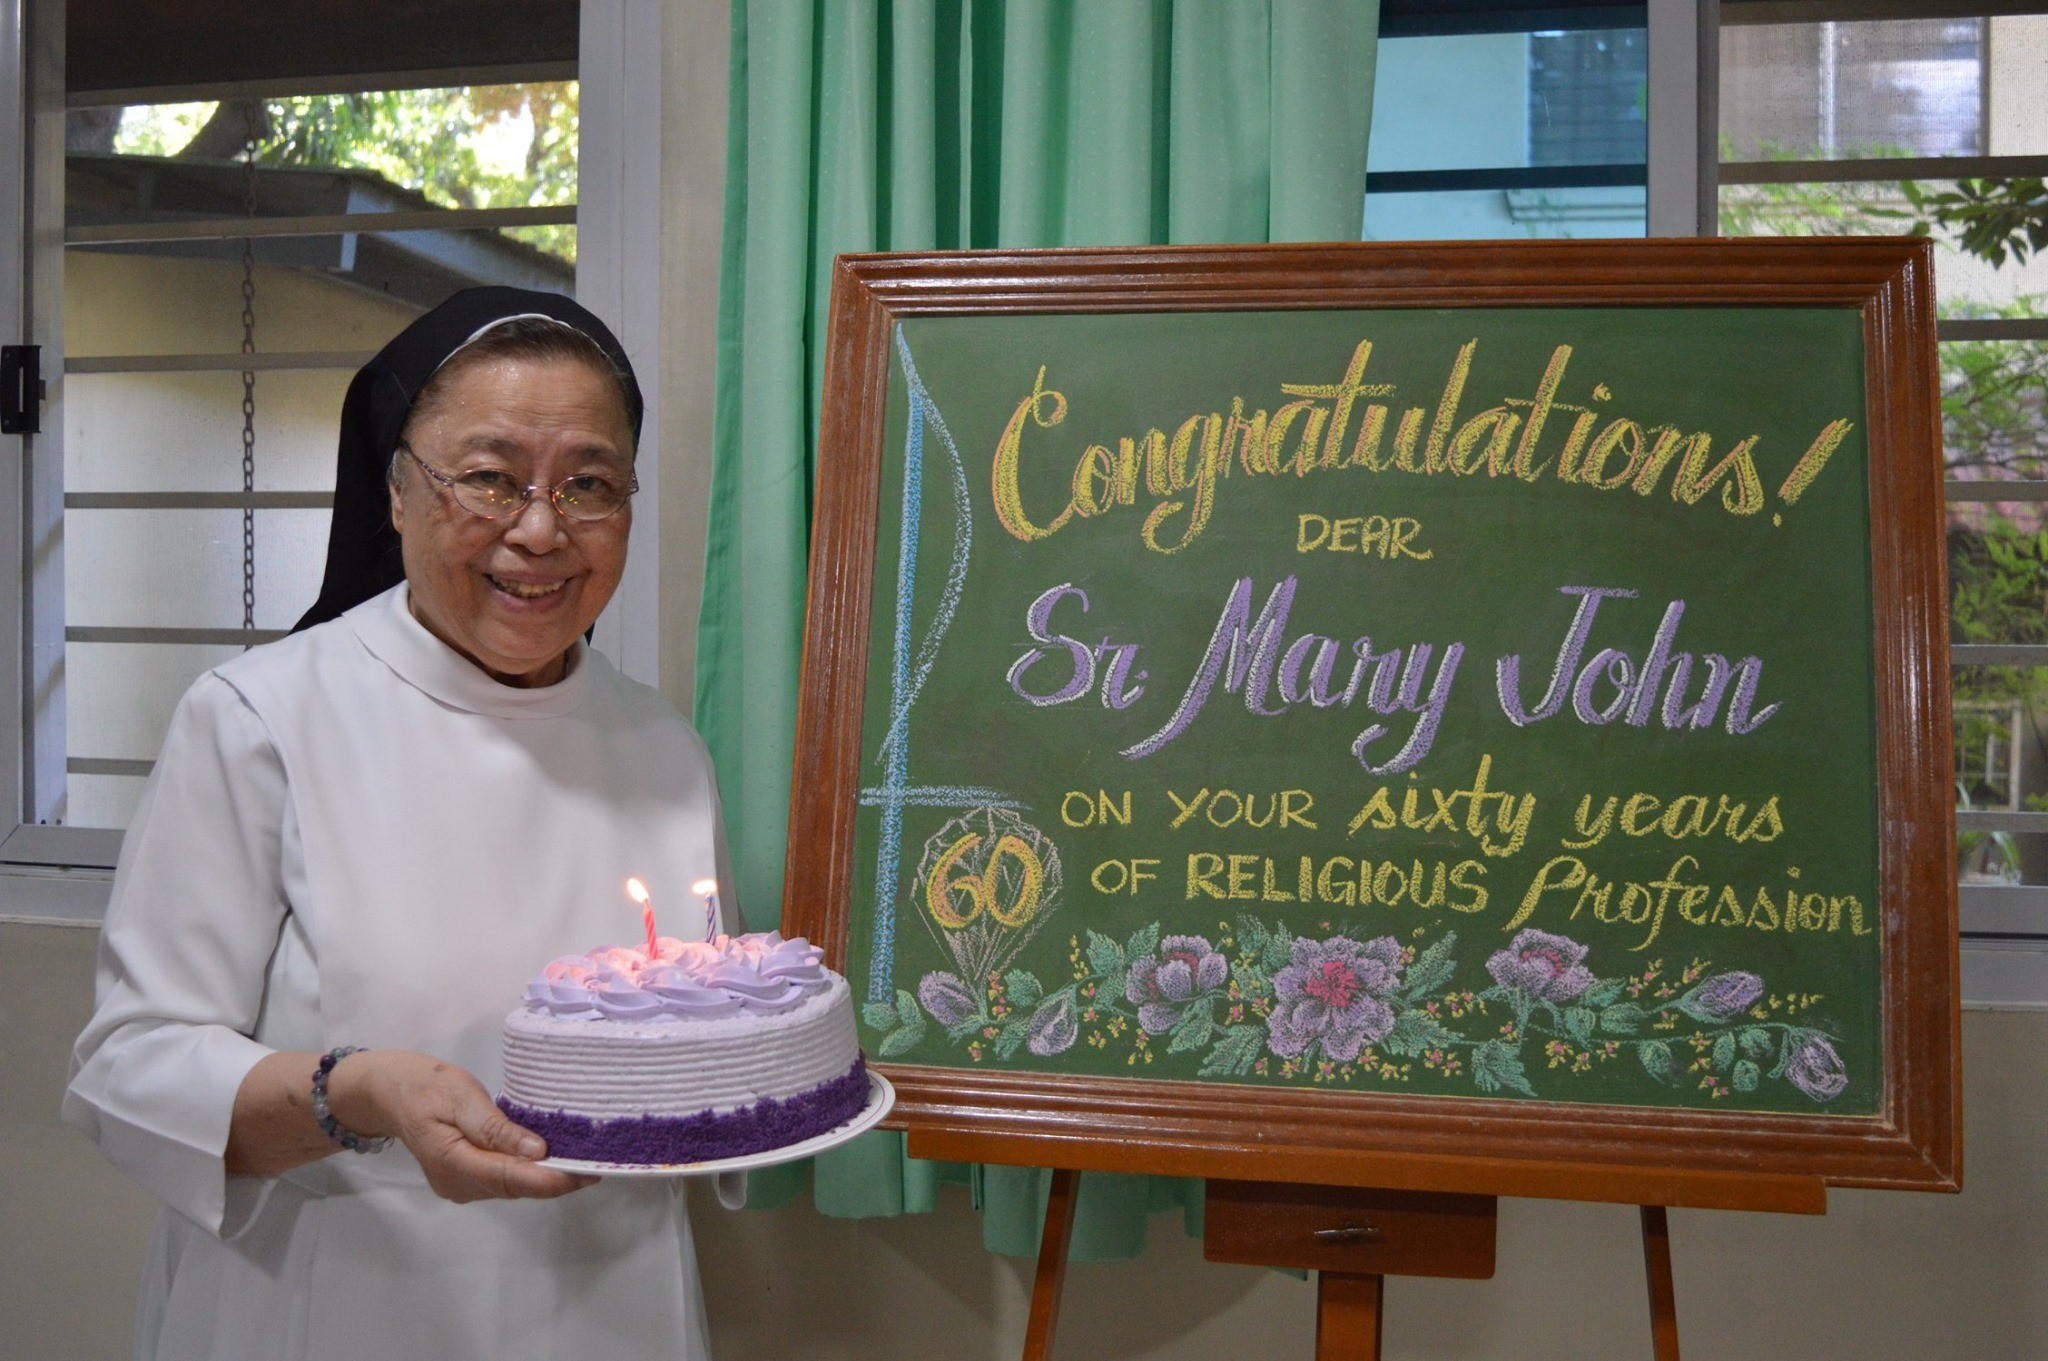 Sr. Mary John marked her 60 years of religious profession during the enhanced community quarantine in Metro Manila. Photo from Sr. Mary John Mananzan’s Facebook page